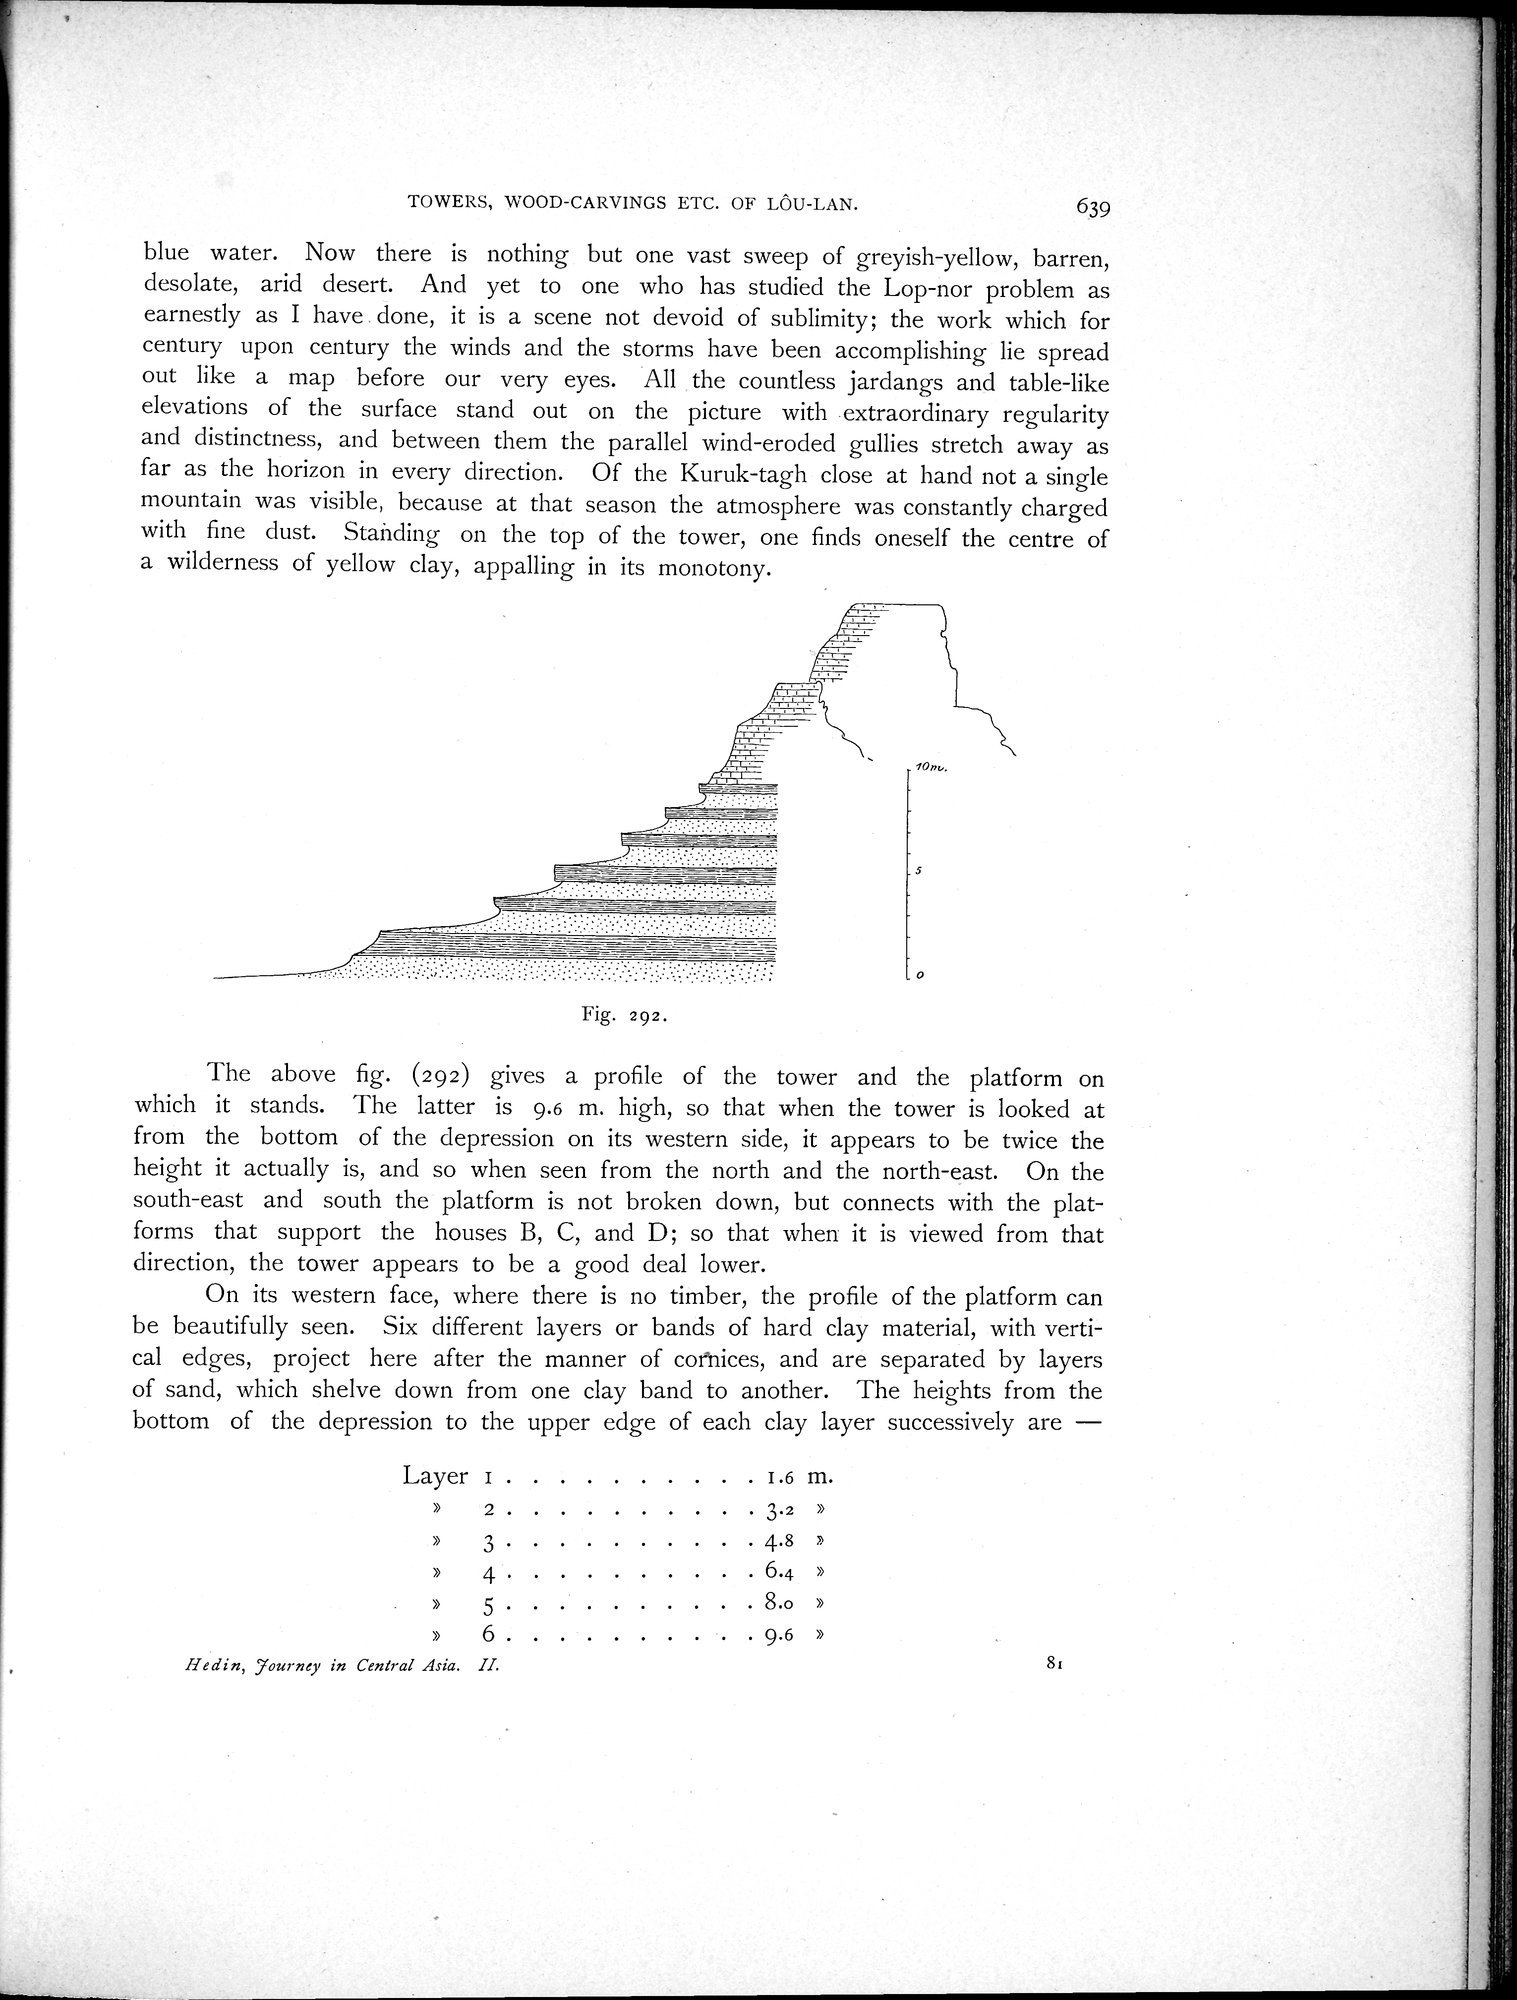 Scientific Results of a Journey in Central Asia, 1899-1902 : vol.2 / Page 815 (Grayscale High Resolution Image)